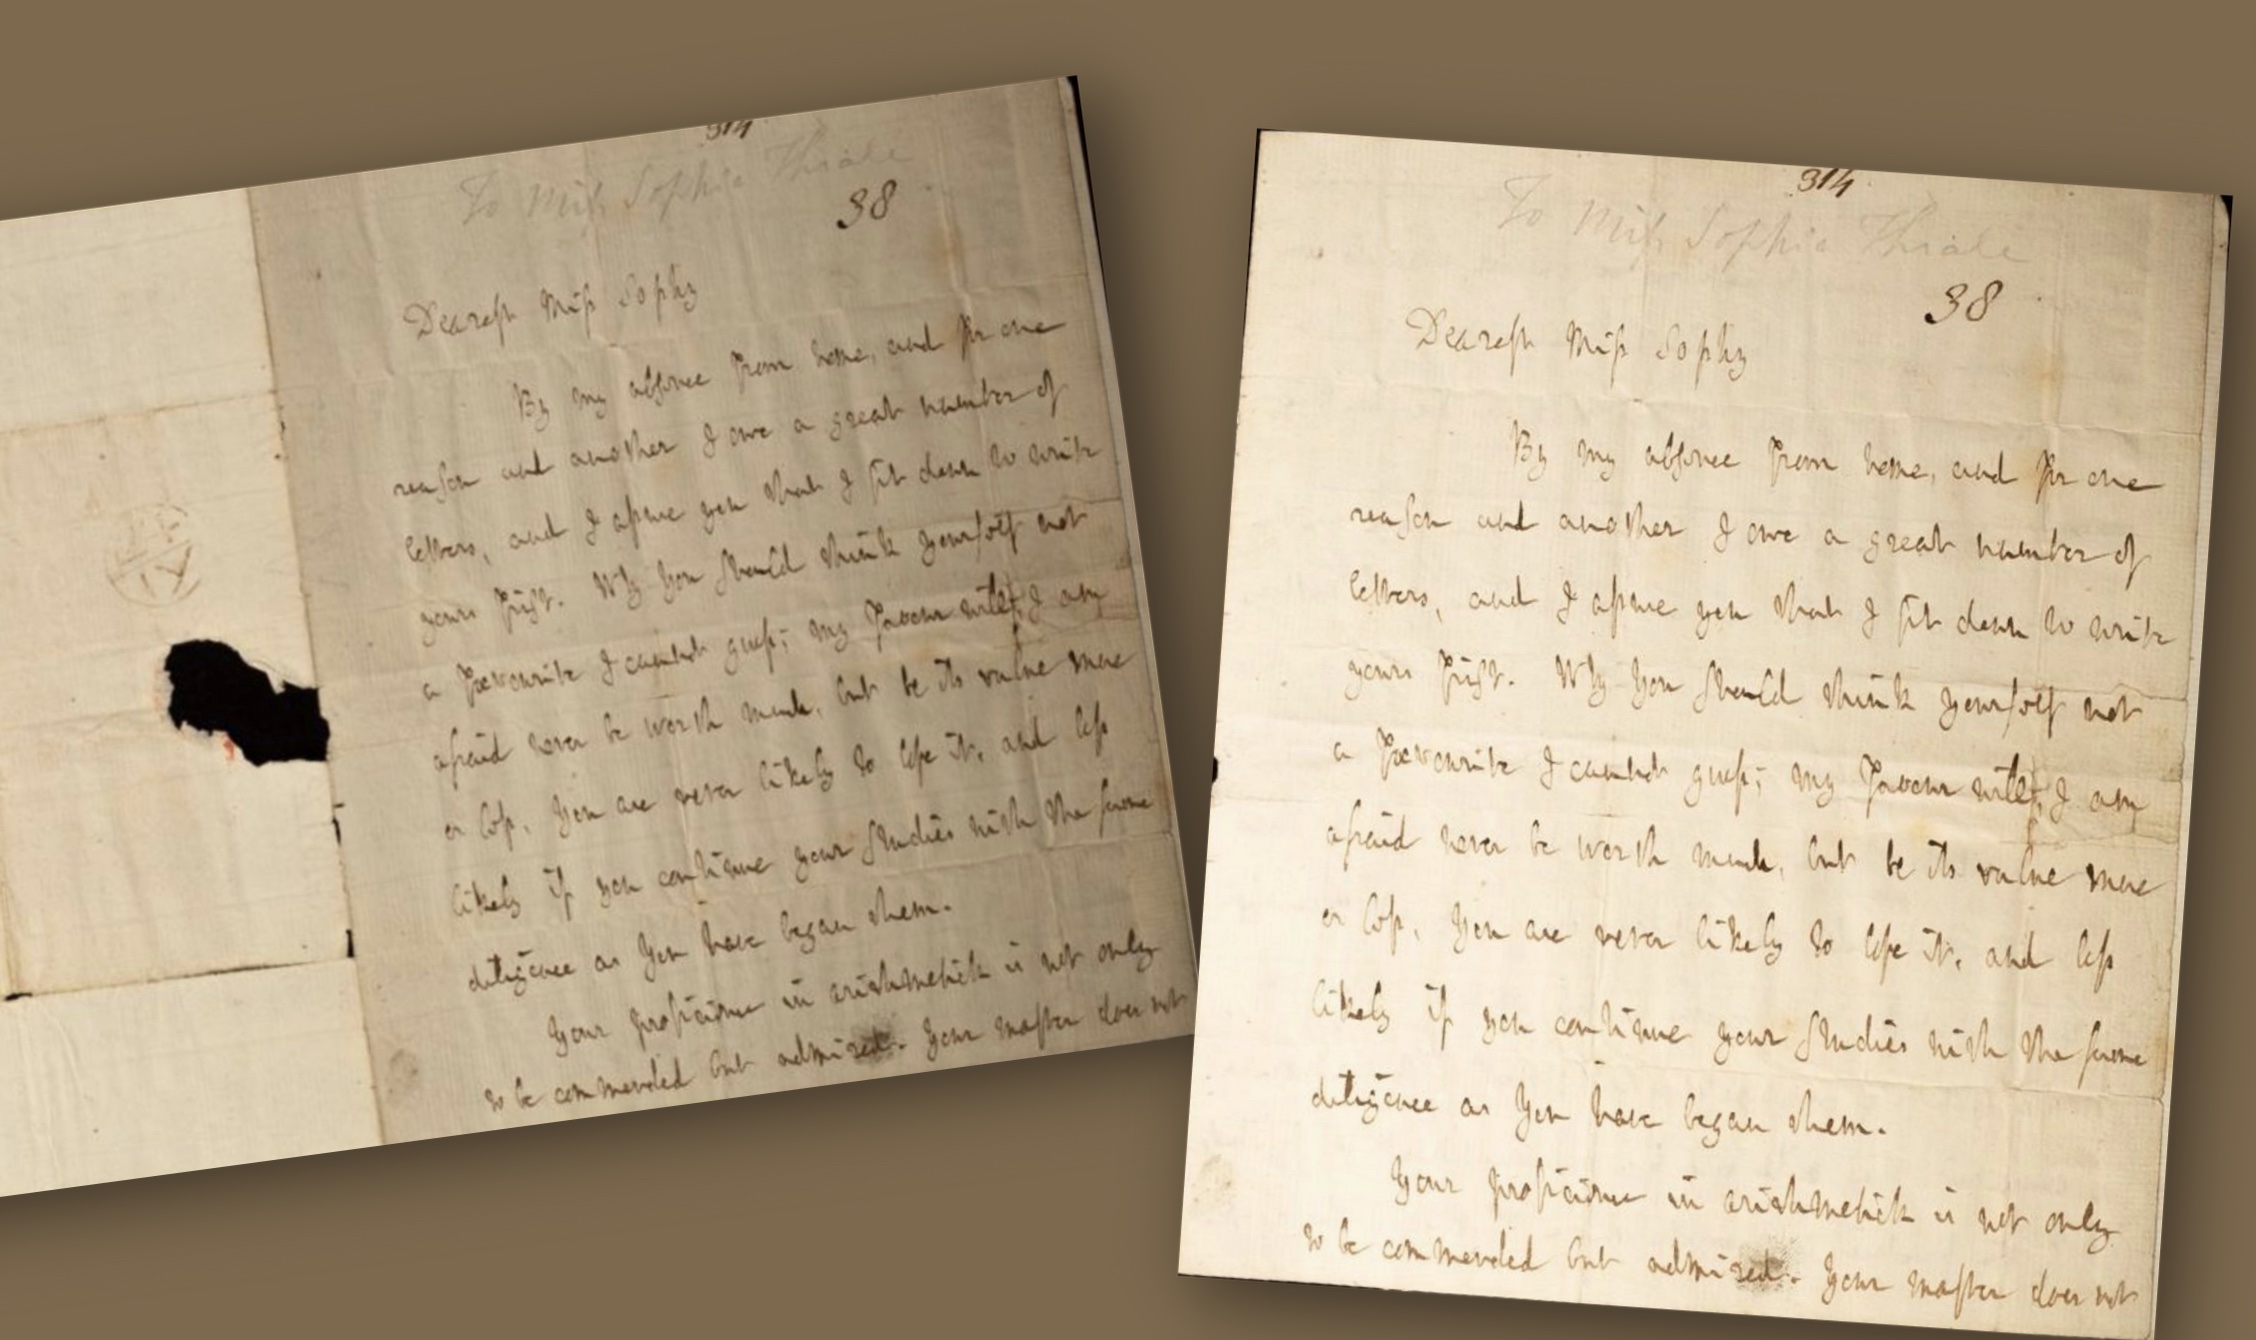 Samuel Johnson letter sells for thousands – Antique Collecting